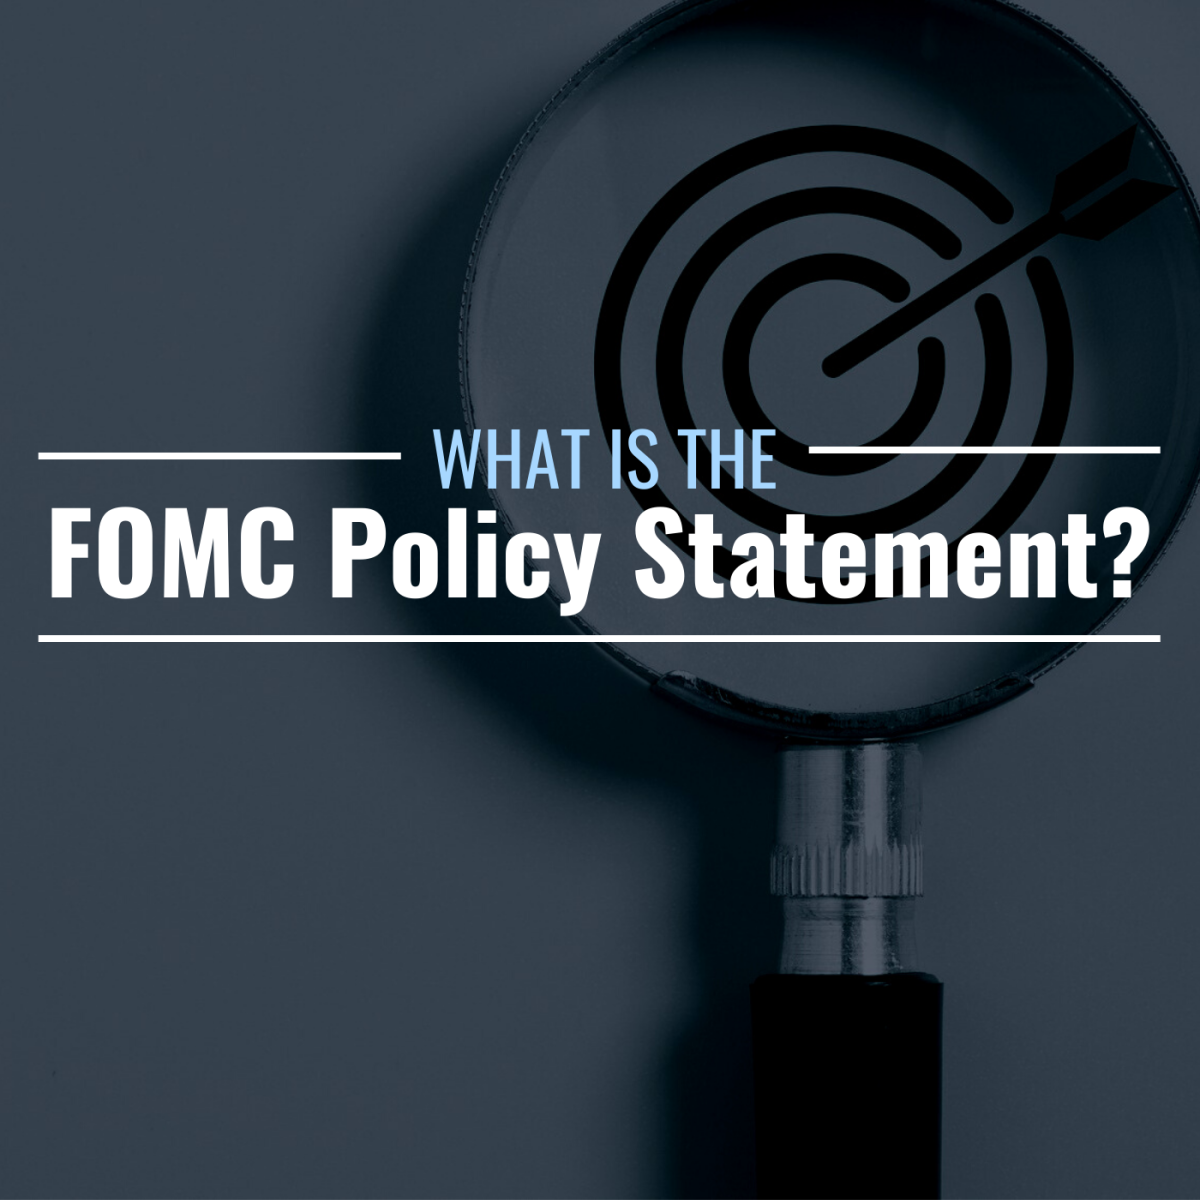 Image of a bullseye inside of a magnifying glass with the text overlay: "What Is the FOMC Policy Statement?"